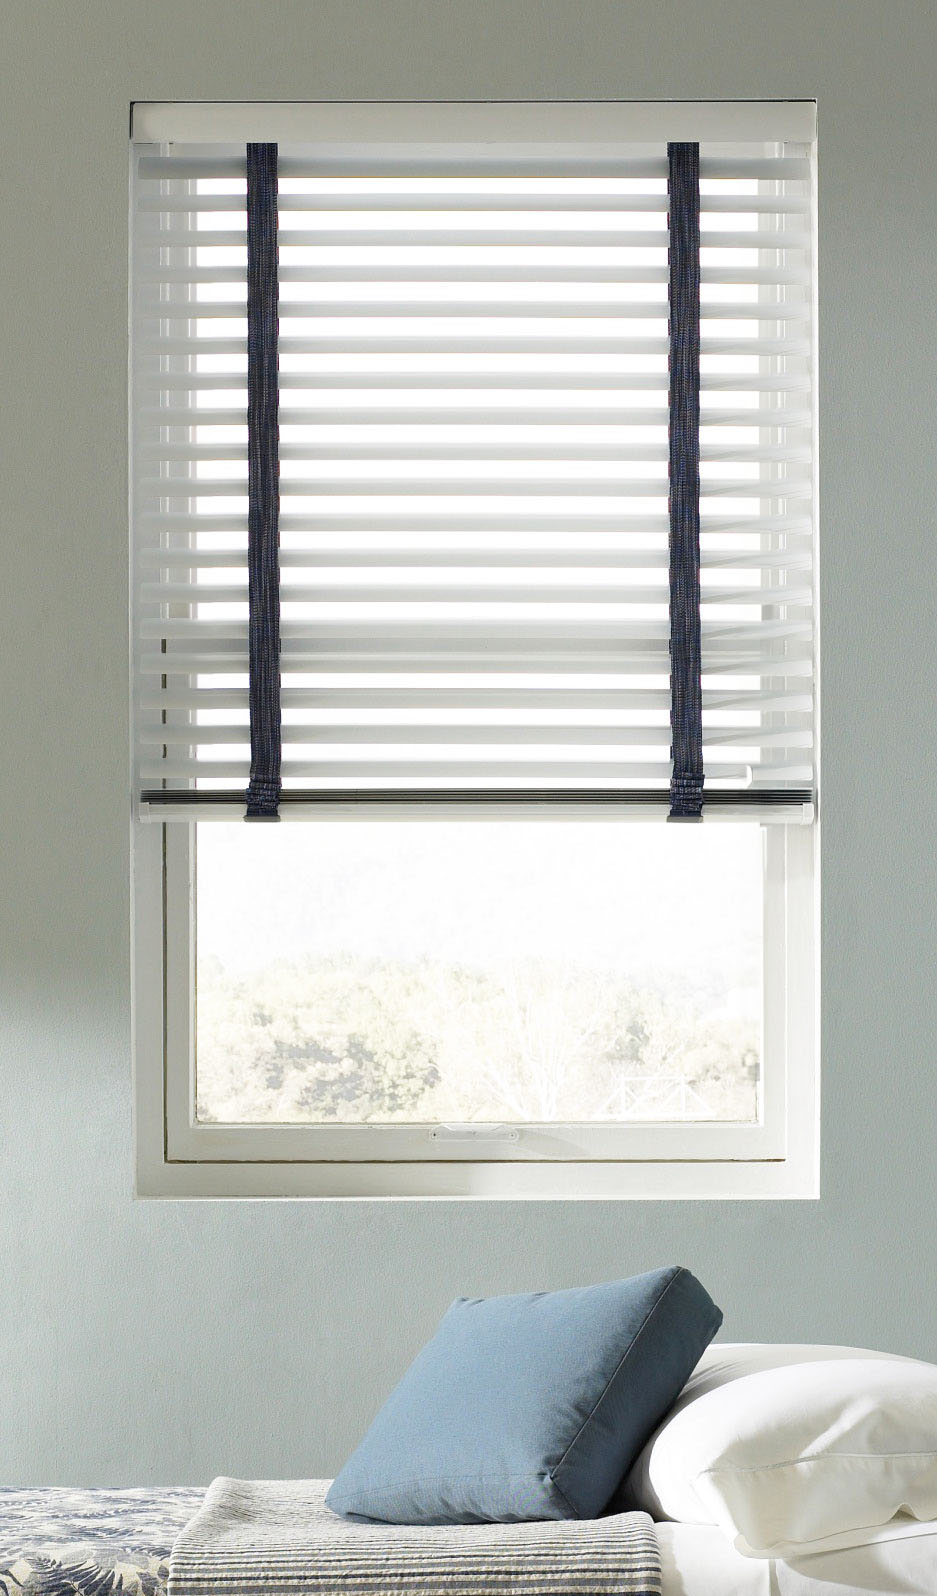 White Classic Collection® Aluminum Blinds with blue ladders against a light blue wall in a bedroom